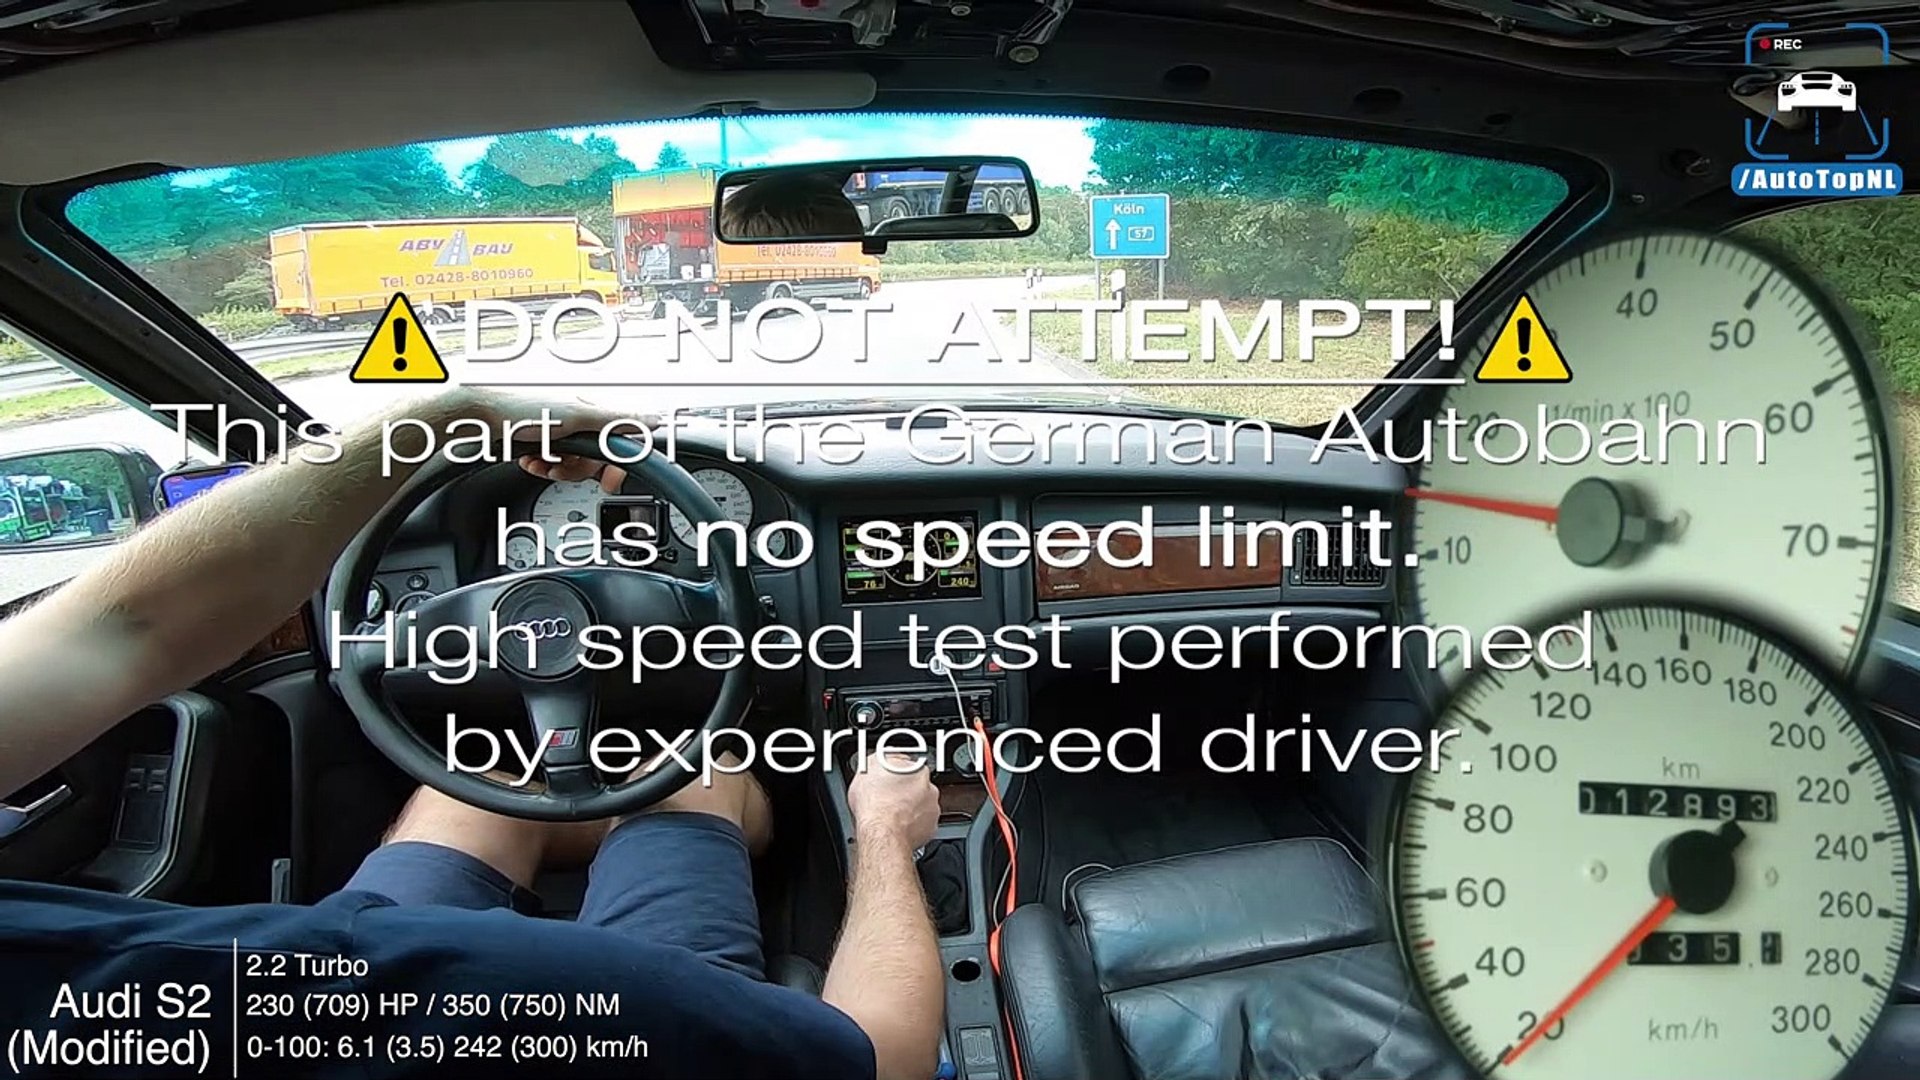 709HP AUDI S2 HUGE TURBO! on AUTOBAHN (NO SPEED LIMIT) by AutoTopNL